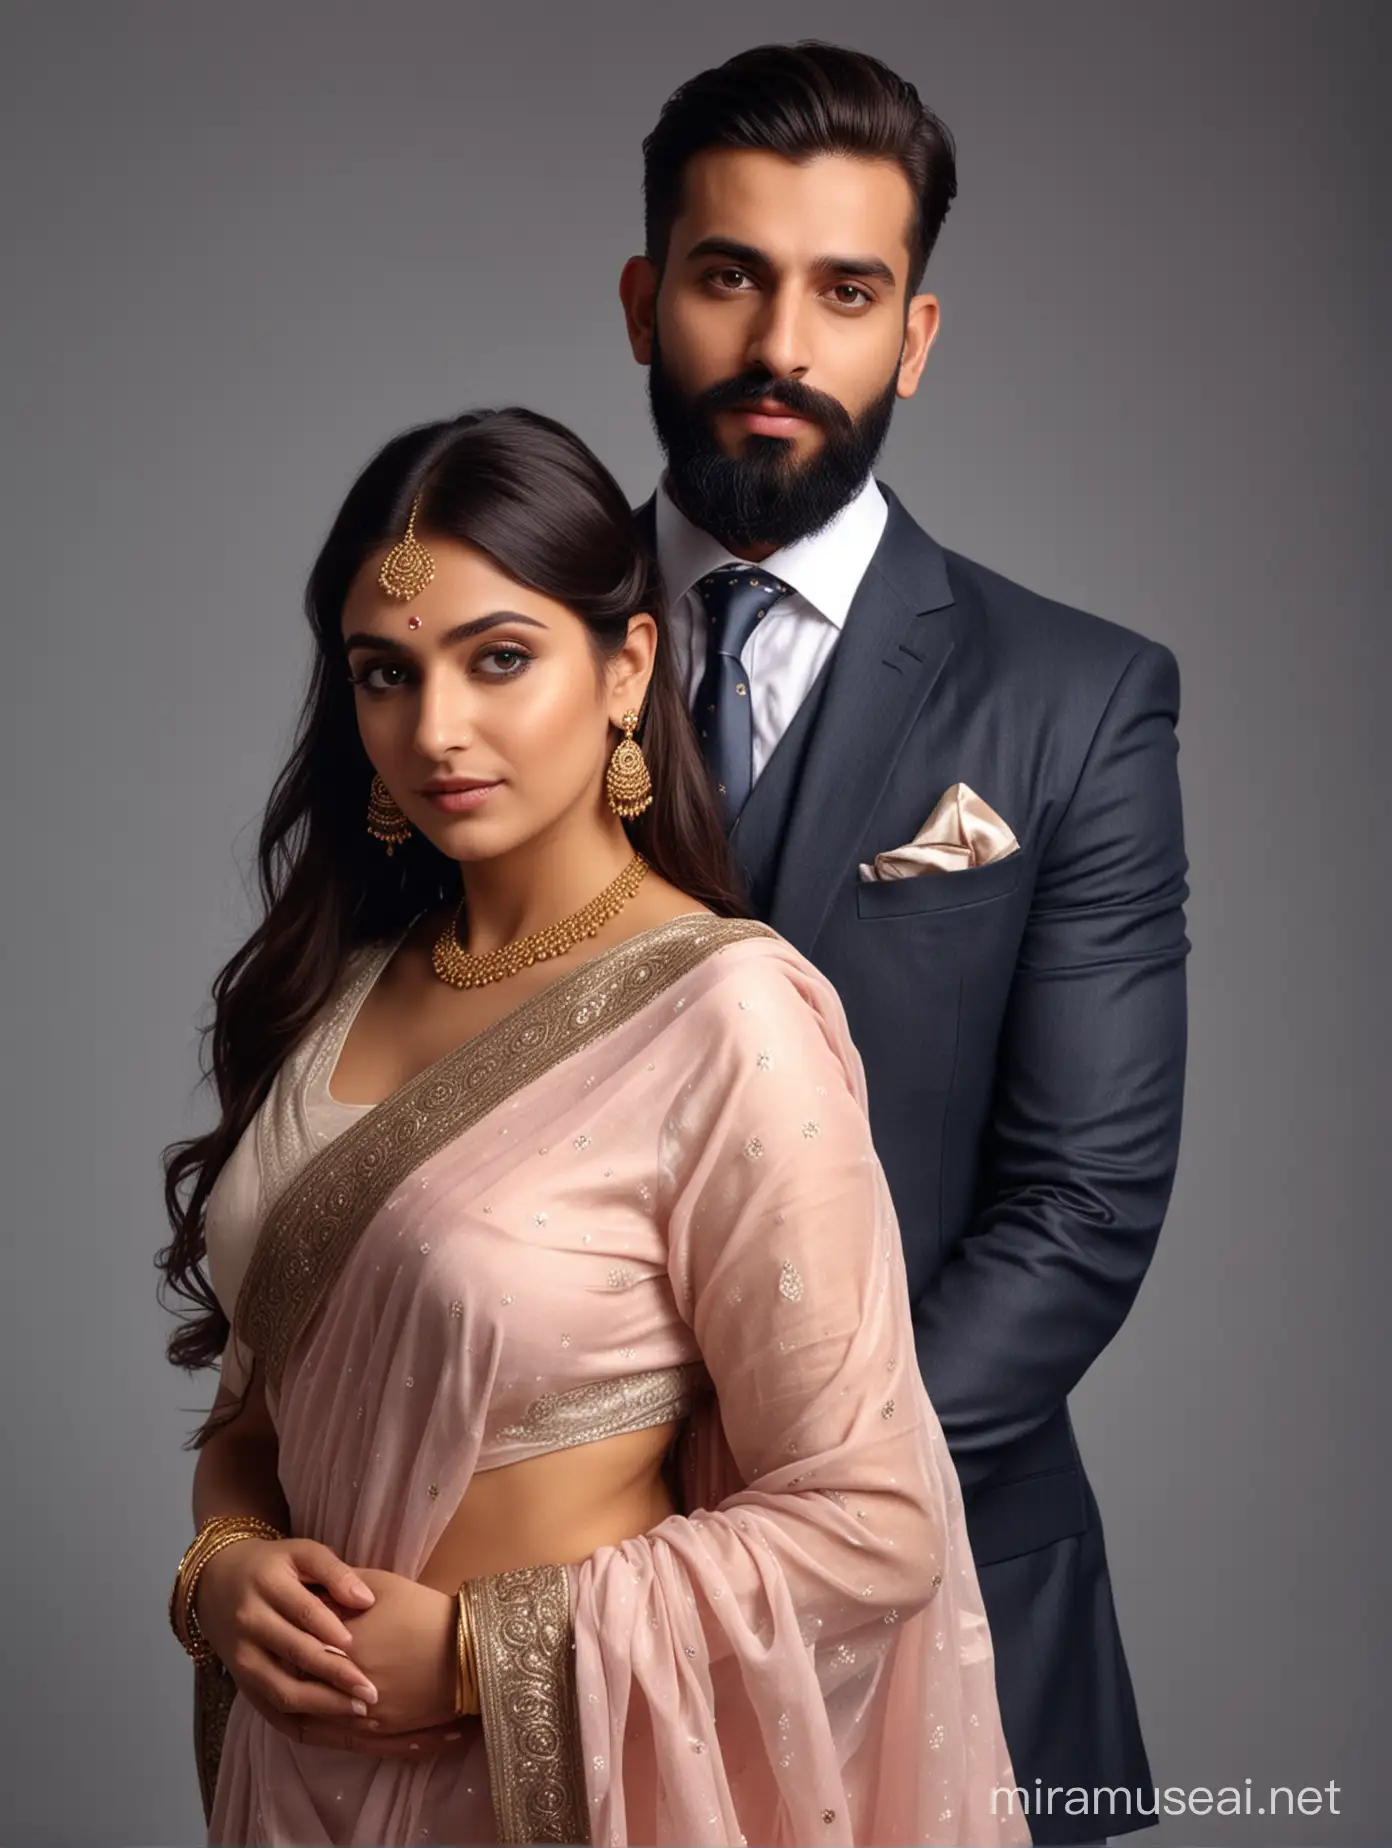 full portrait photo of most beautiful european couple as most beautiful indian couple, most beautiful girl in saree, full makeup, holding man from back side, . hands around man neck from back of man, with emotional attachment ,  man with stylish beard and in formals and tie, photo realistic, 4k.